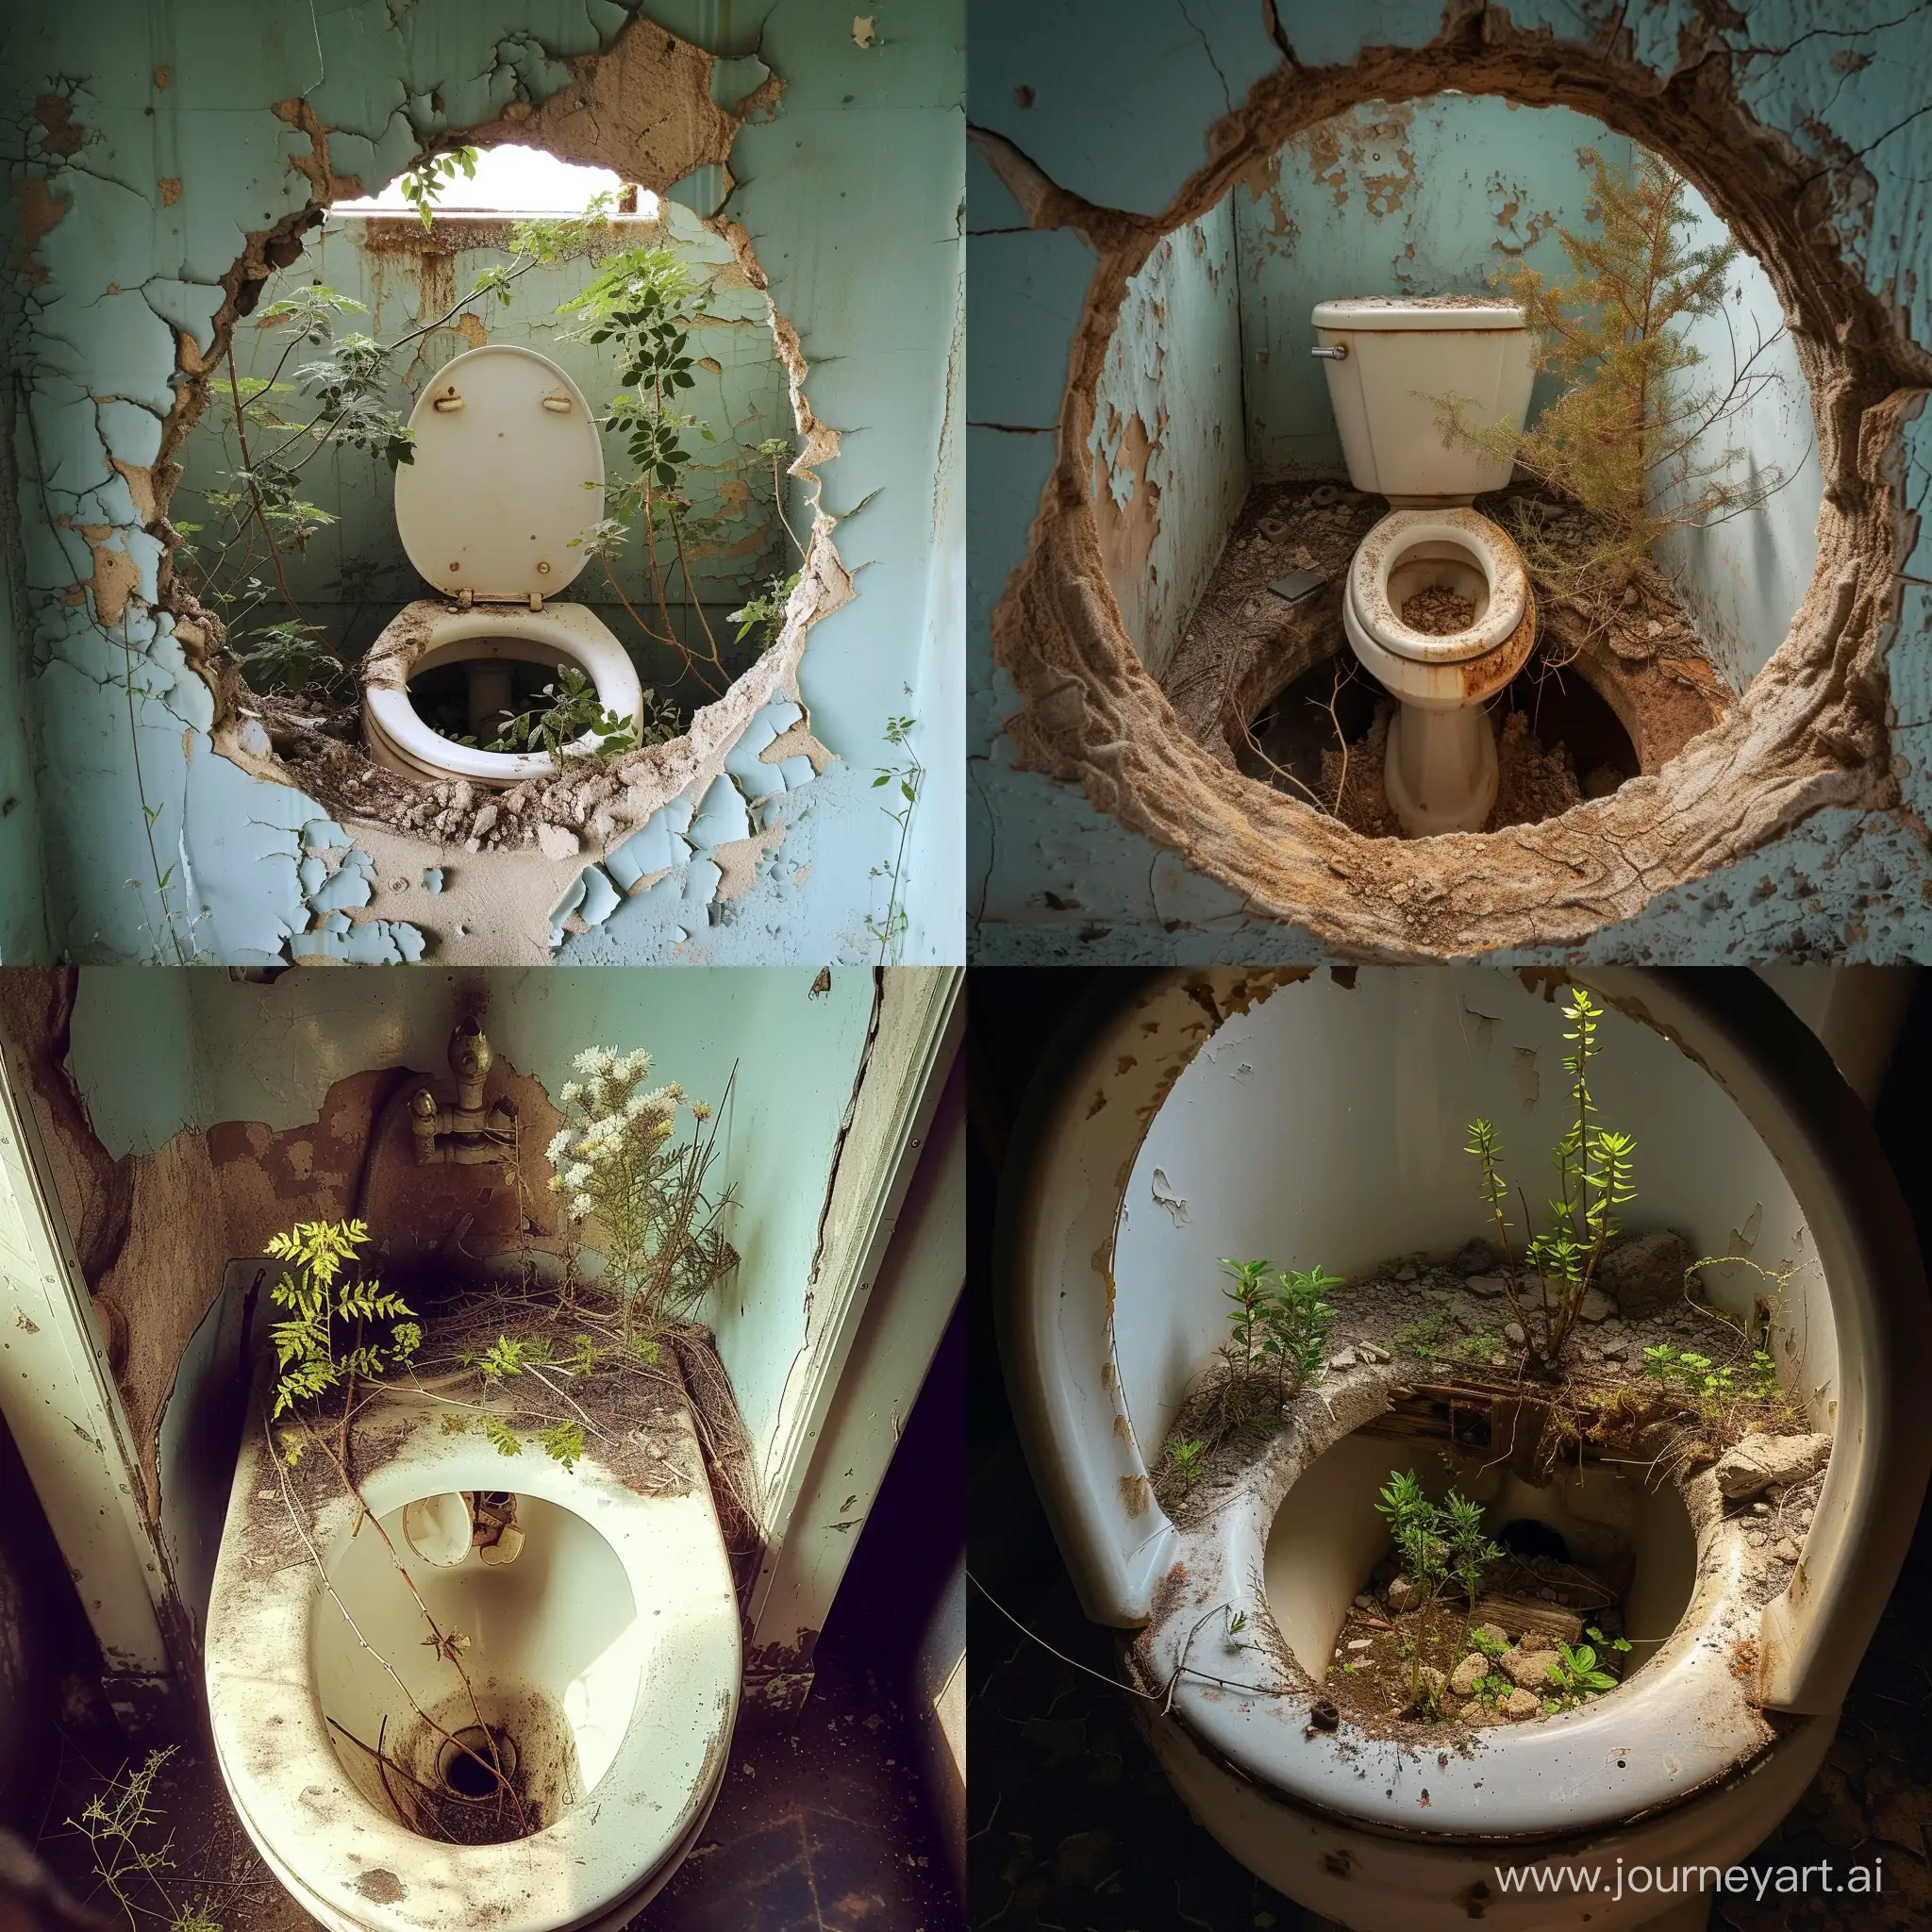 Desolate-Abandoned-Toilet-with-Overgrown-Vegetation